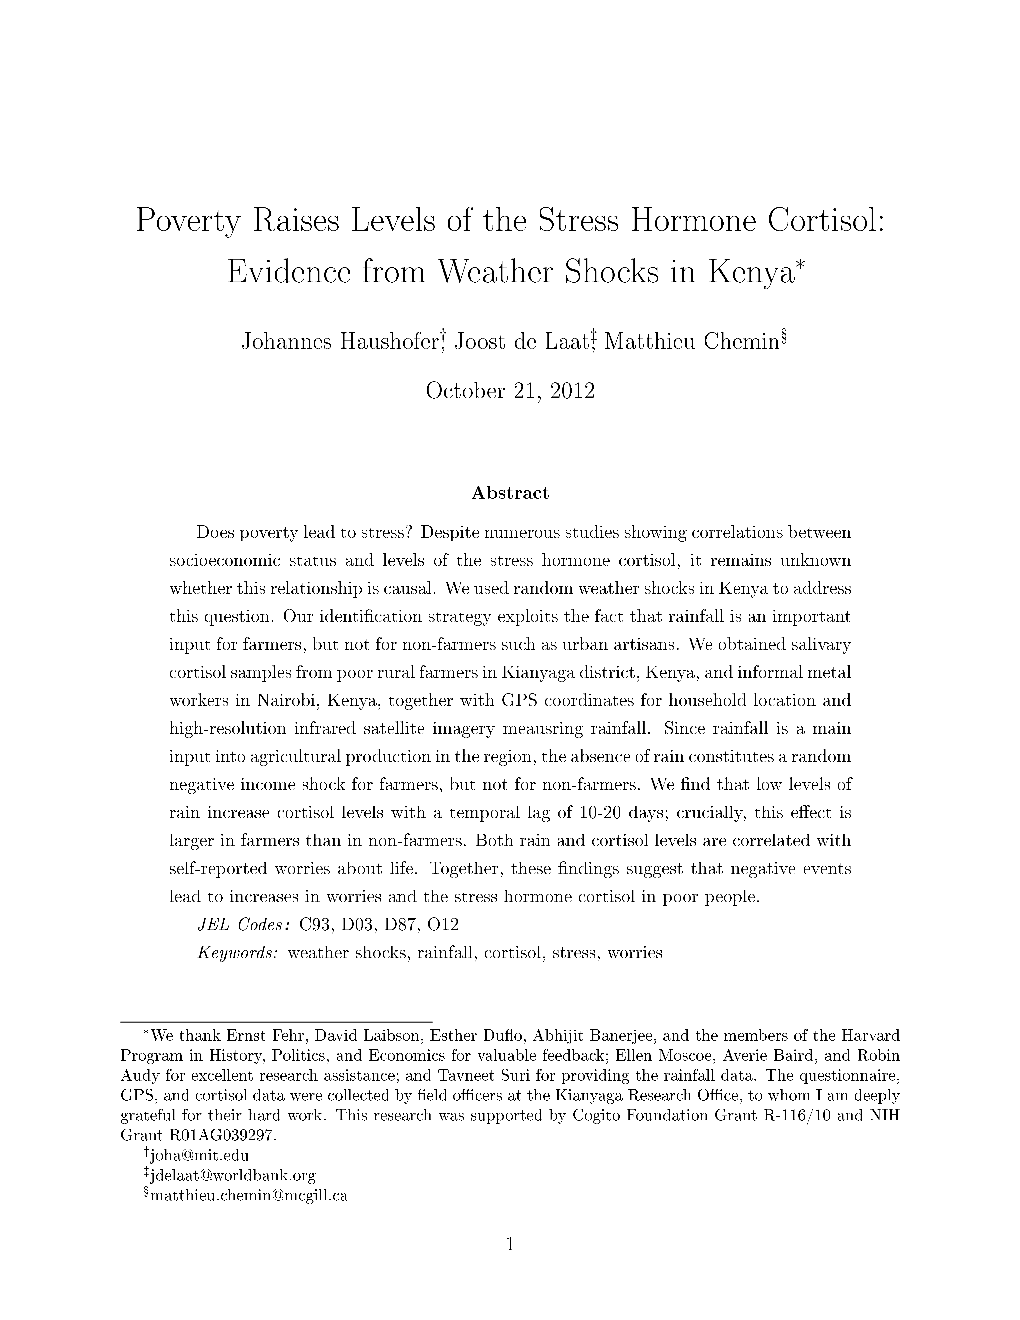 Poverty Raises Levels of the Stress Hormone Cortisol: Evidence from Weather Shocks in Kenya*